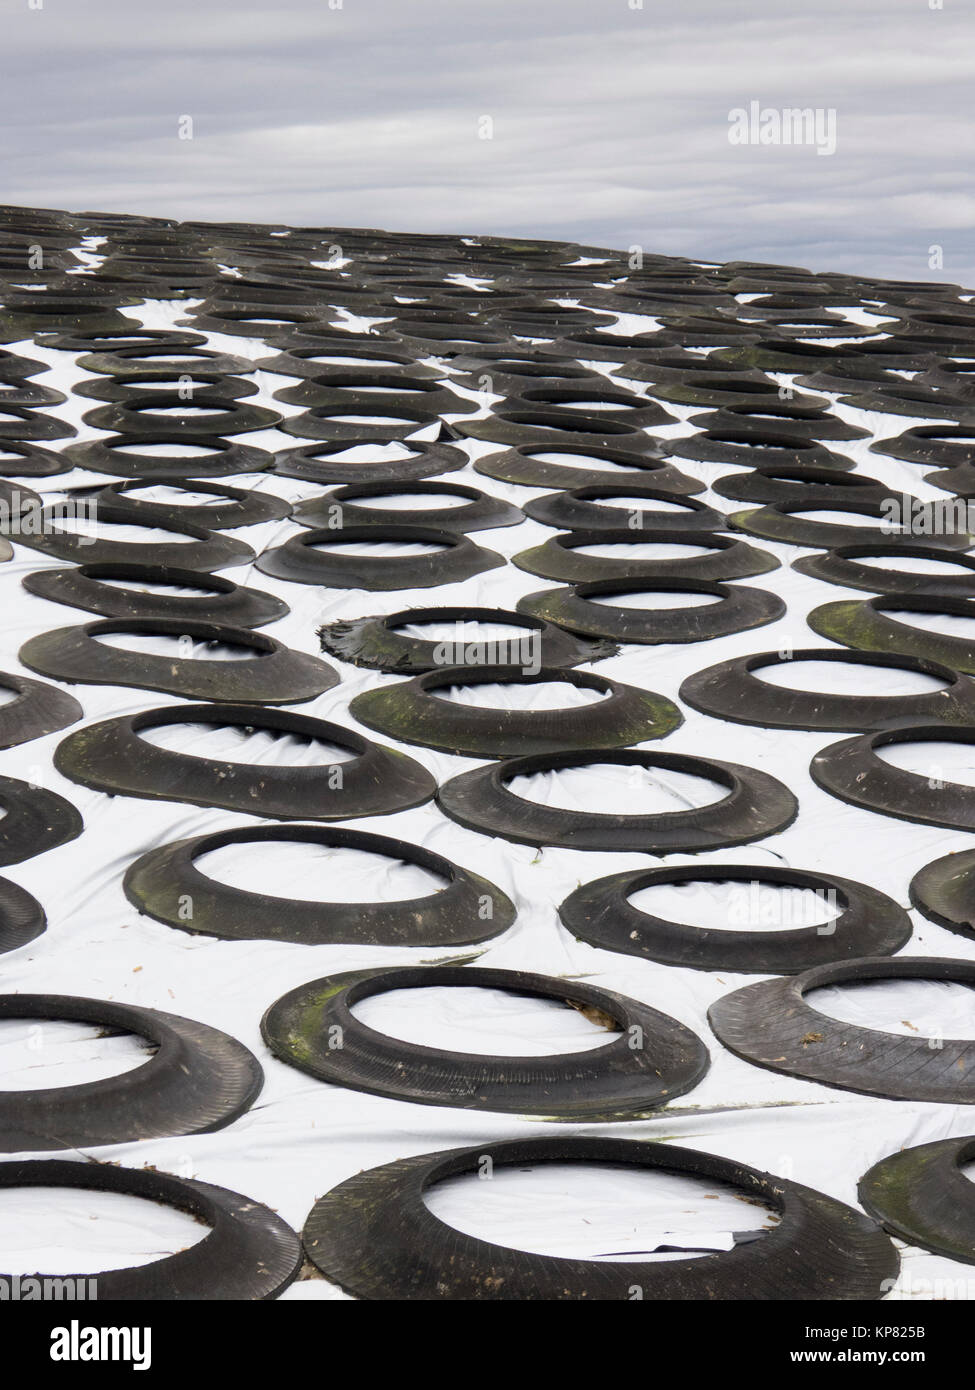 Parts of rubber tires used as weights to cover slledge,at a dairy farm in Monroe,Washington. Stock Photo